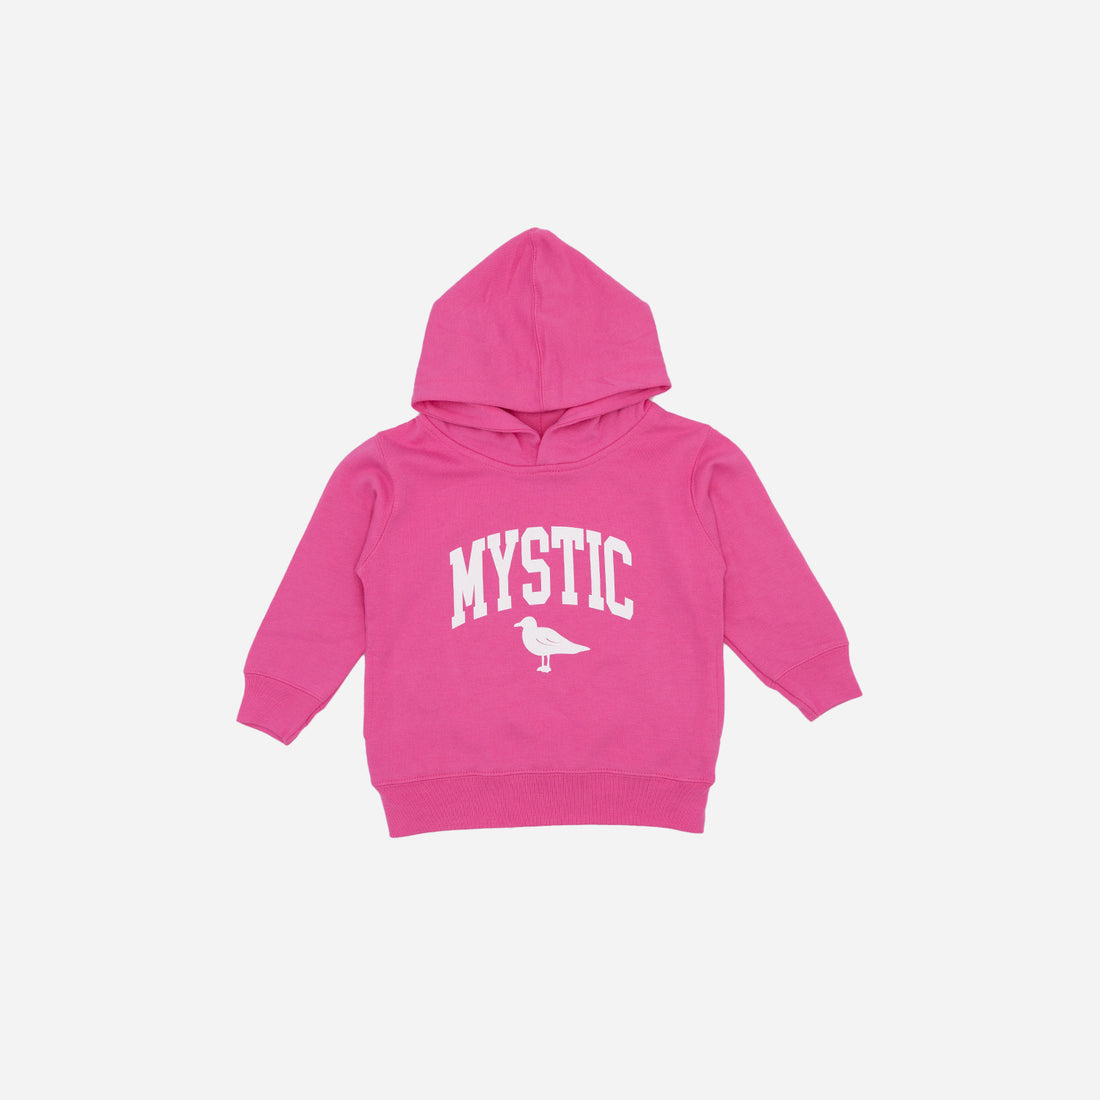 Youth & Kids Apparel from Just Mystic – Just Mystic Brand | Sweatshirts